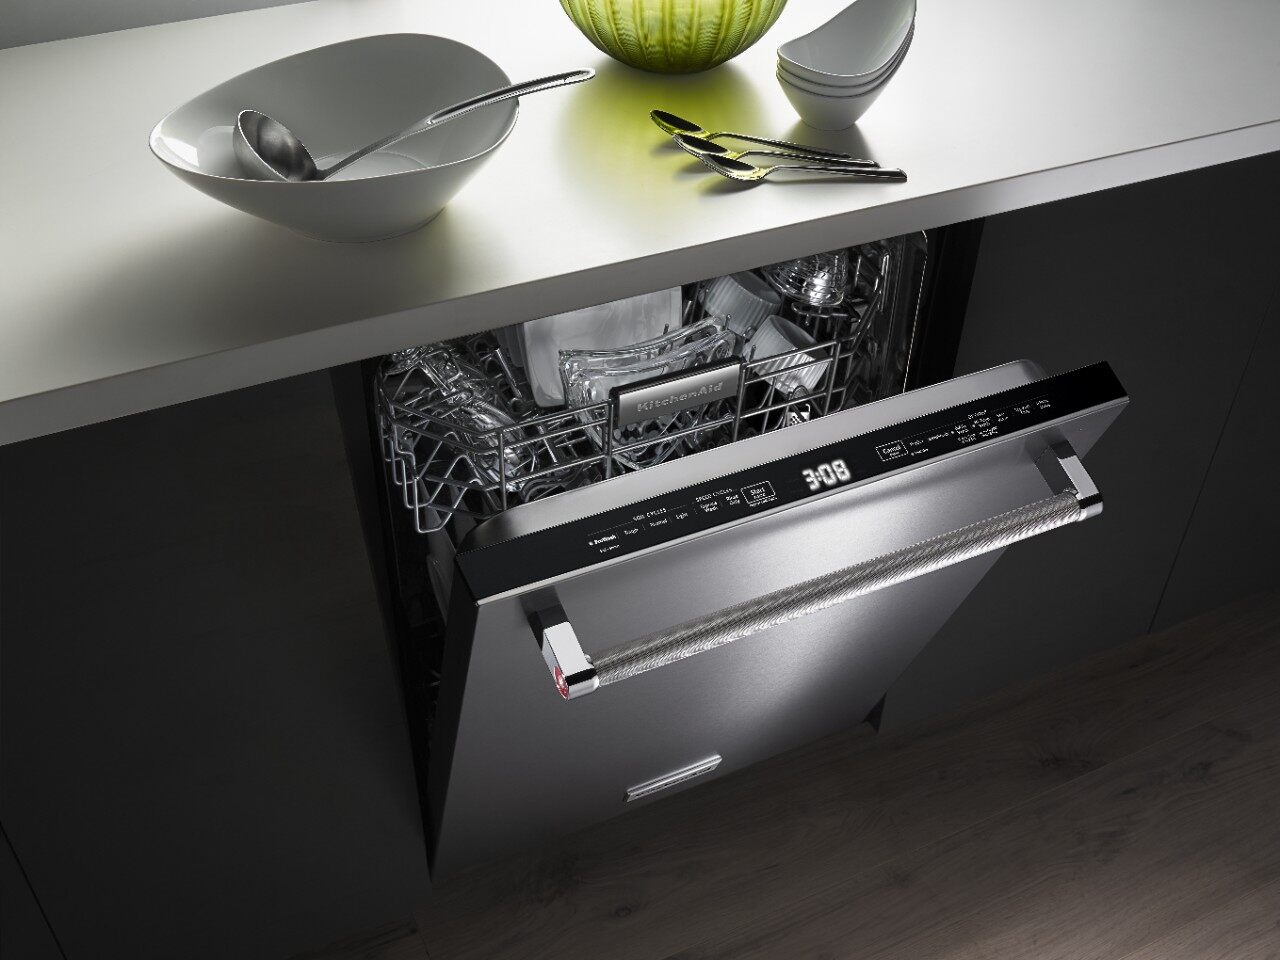 Stainless steel dishwasher in a kitchen